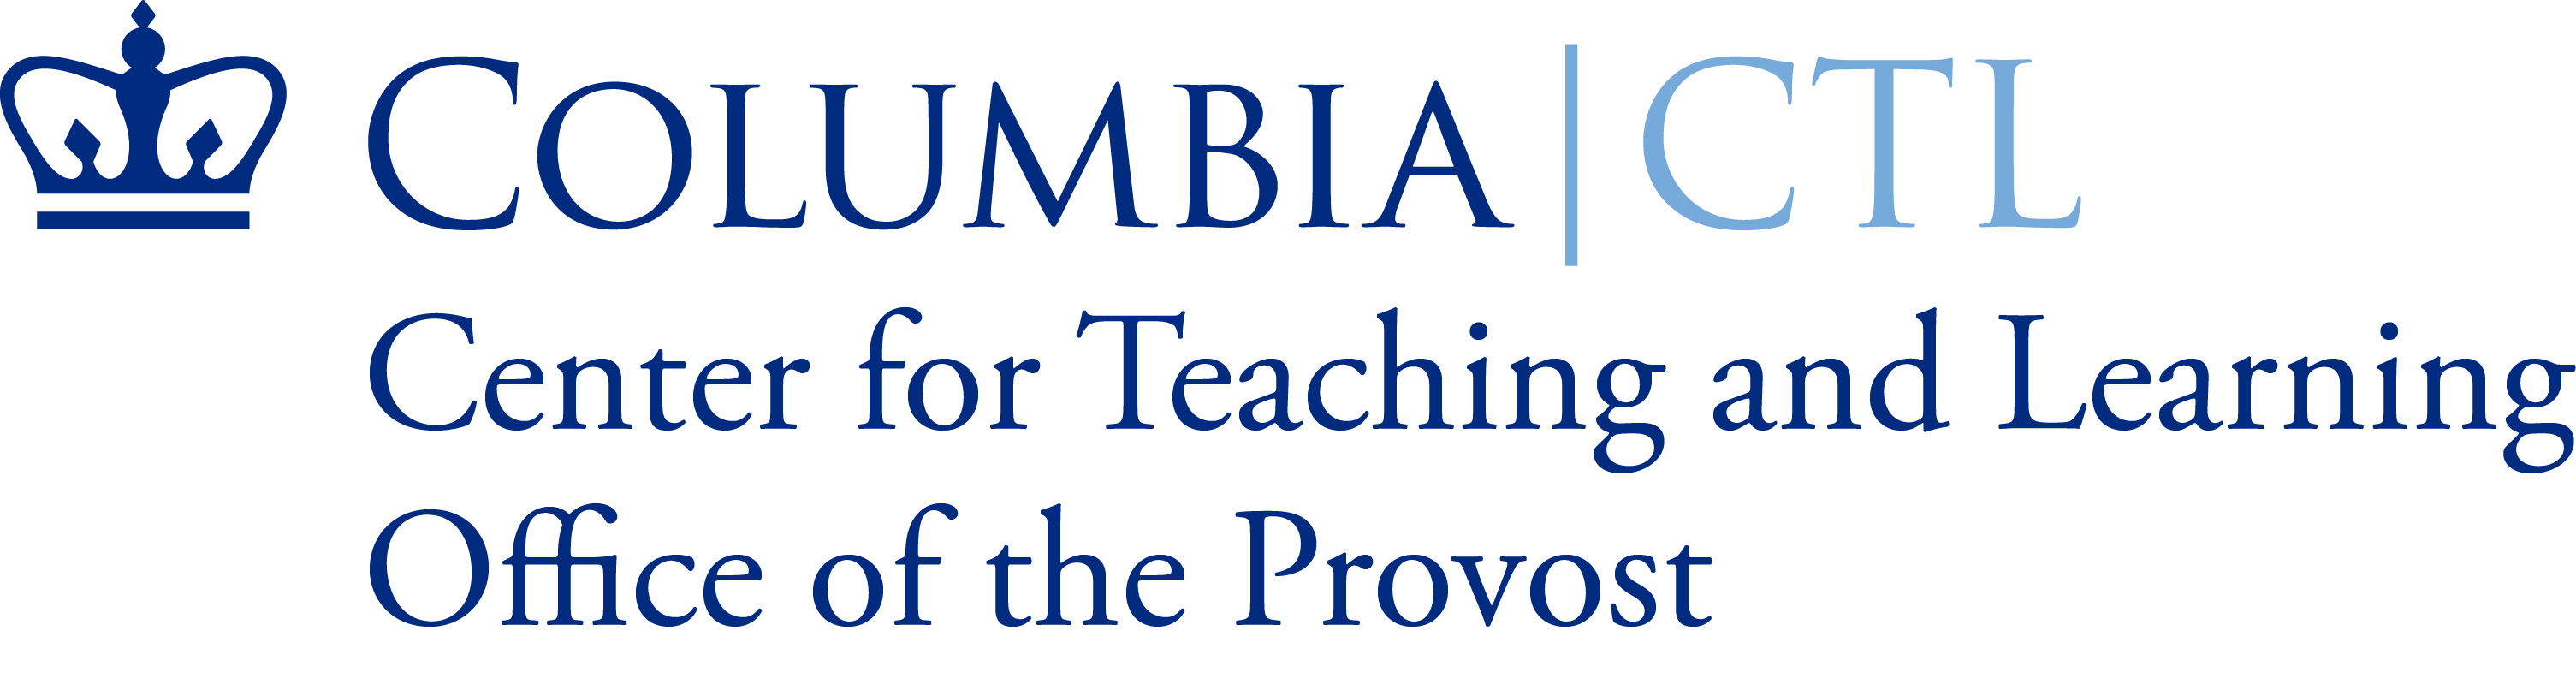 The Columbia Center for Teaching and Learning